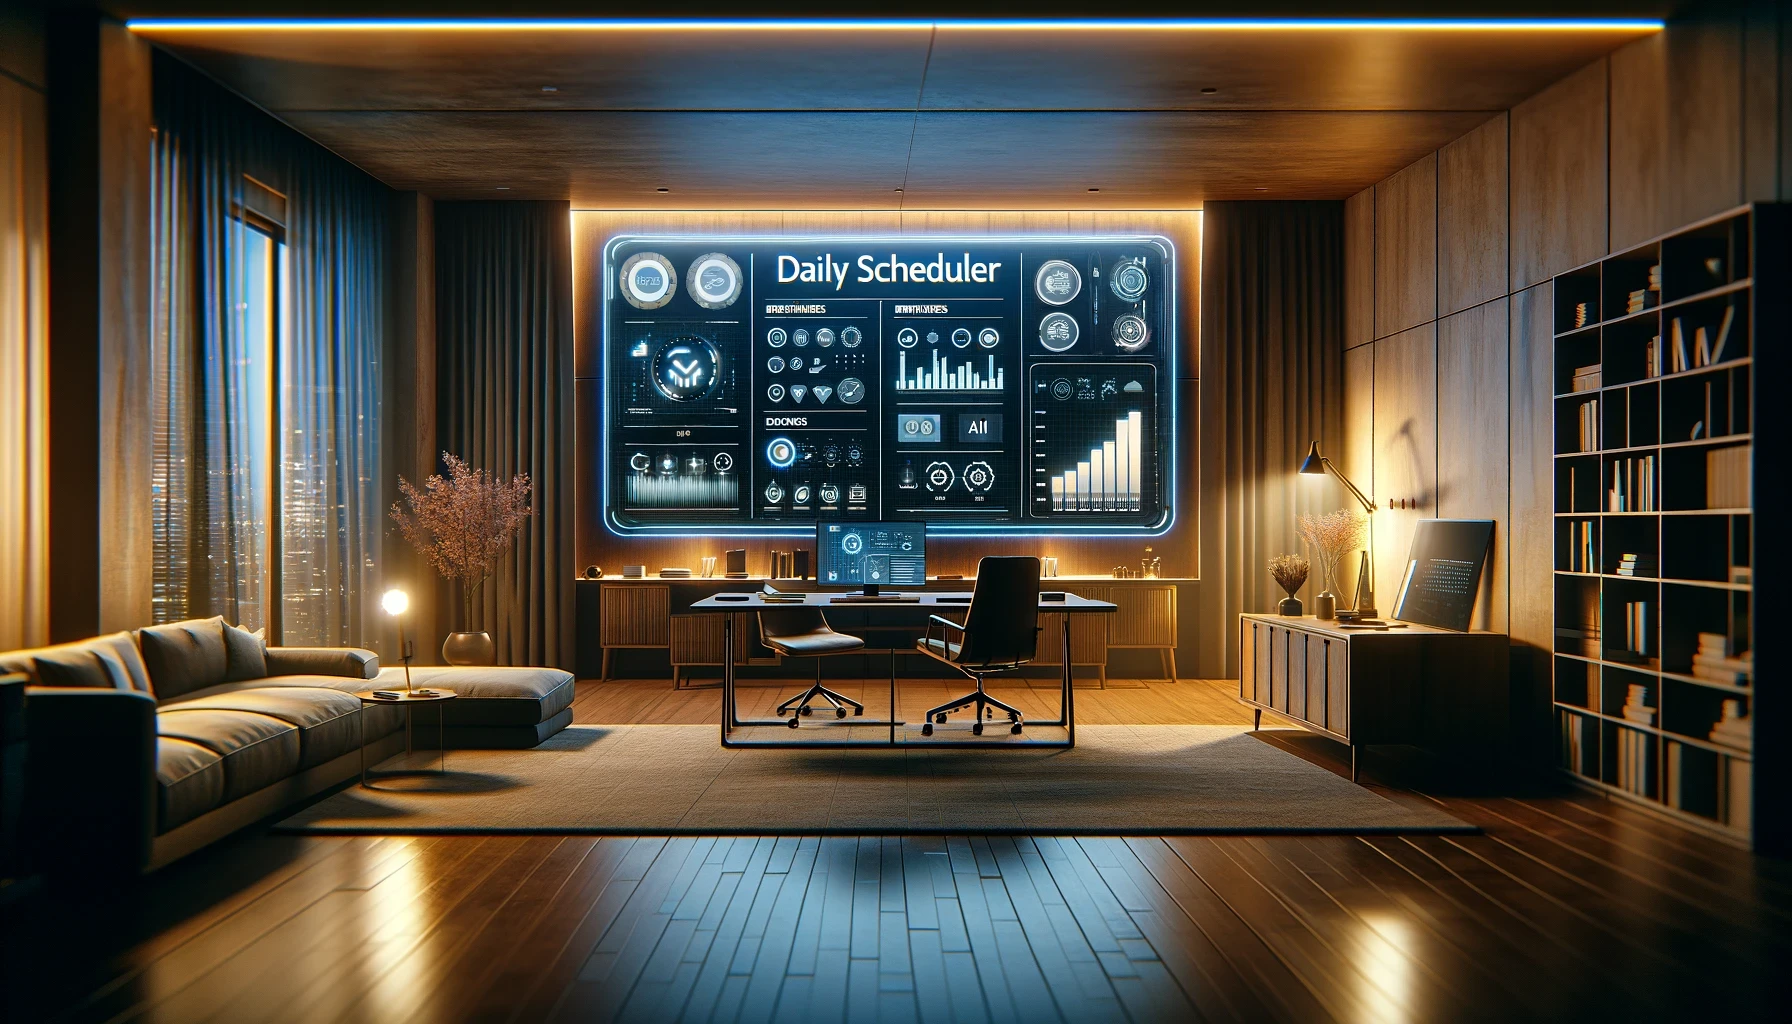 Daily Scheduler Image